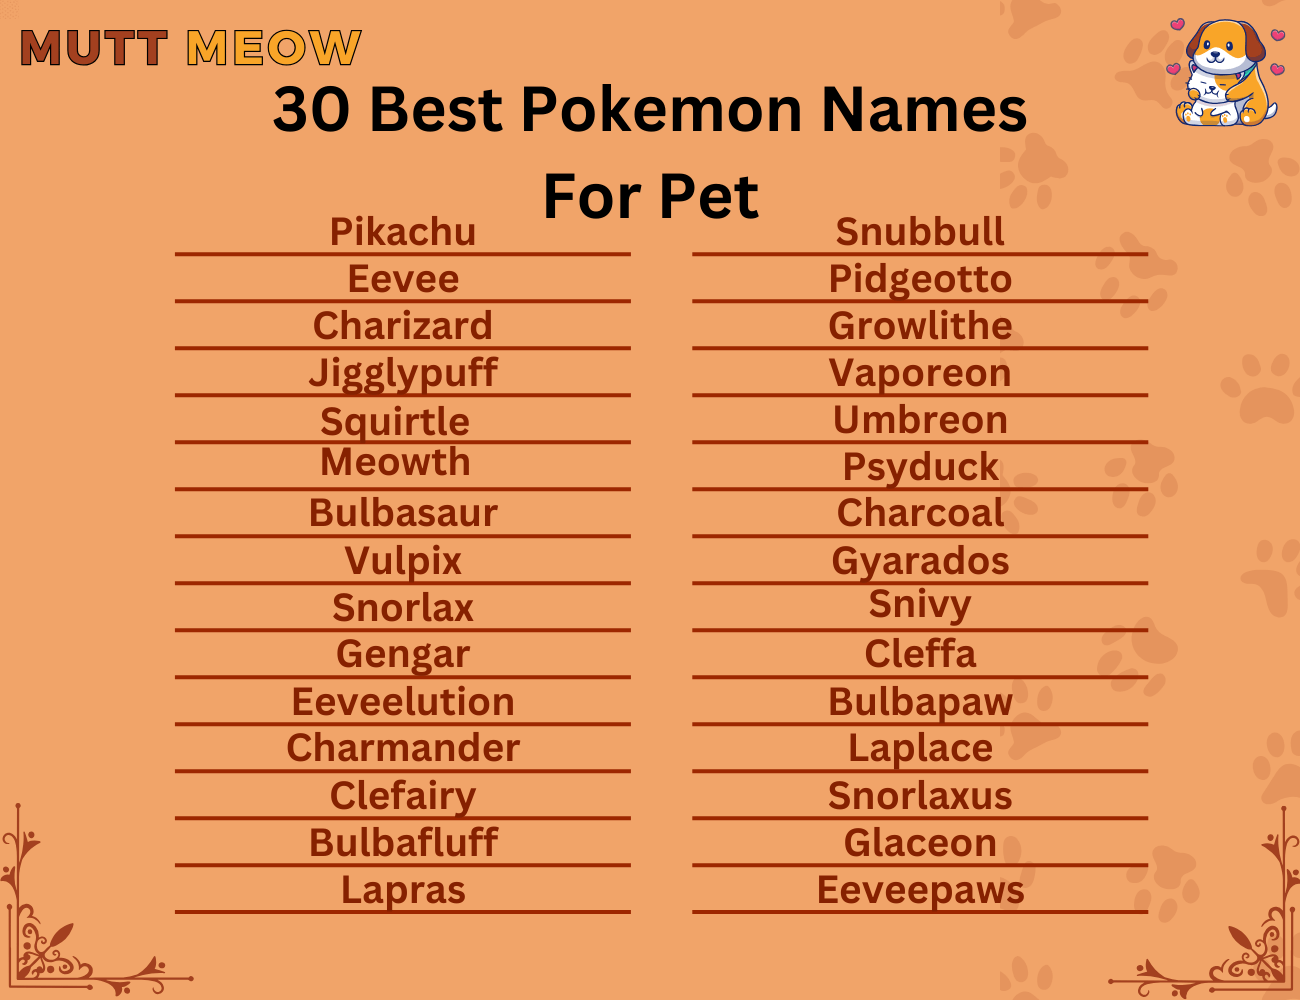 30 Best Pokemon Names For Pets (